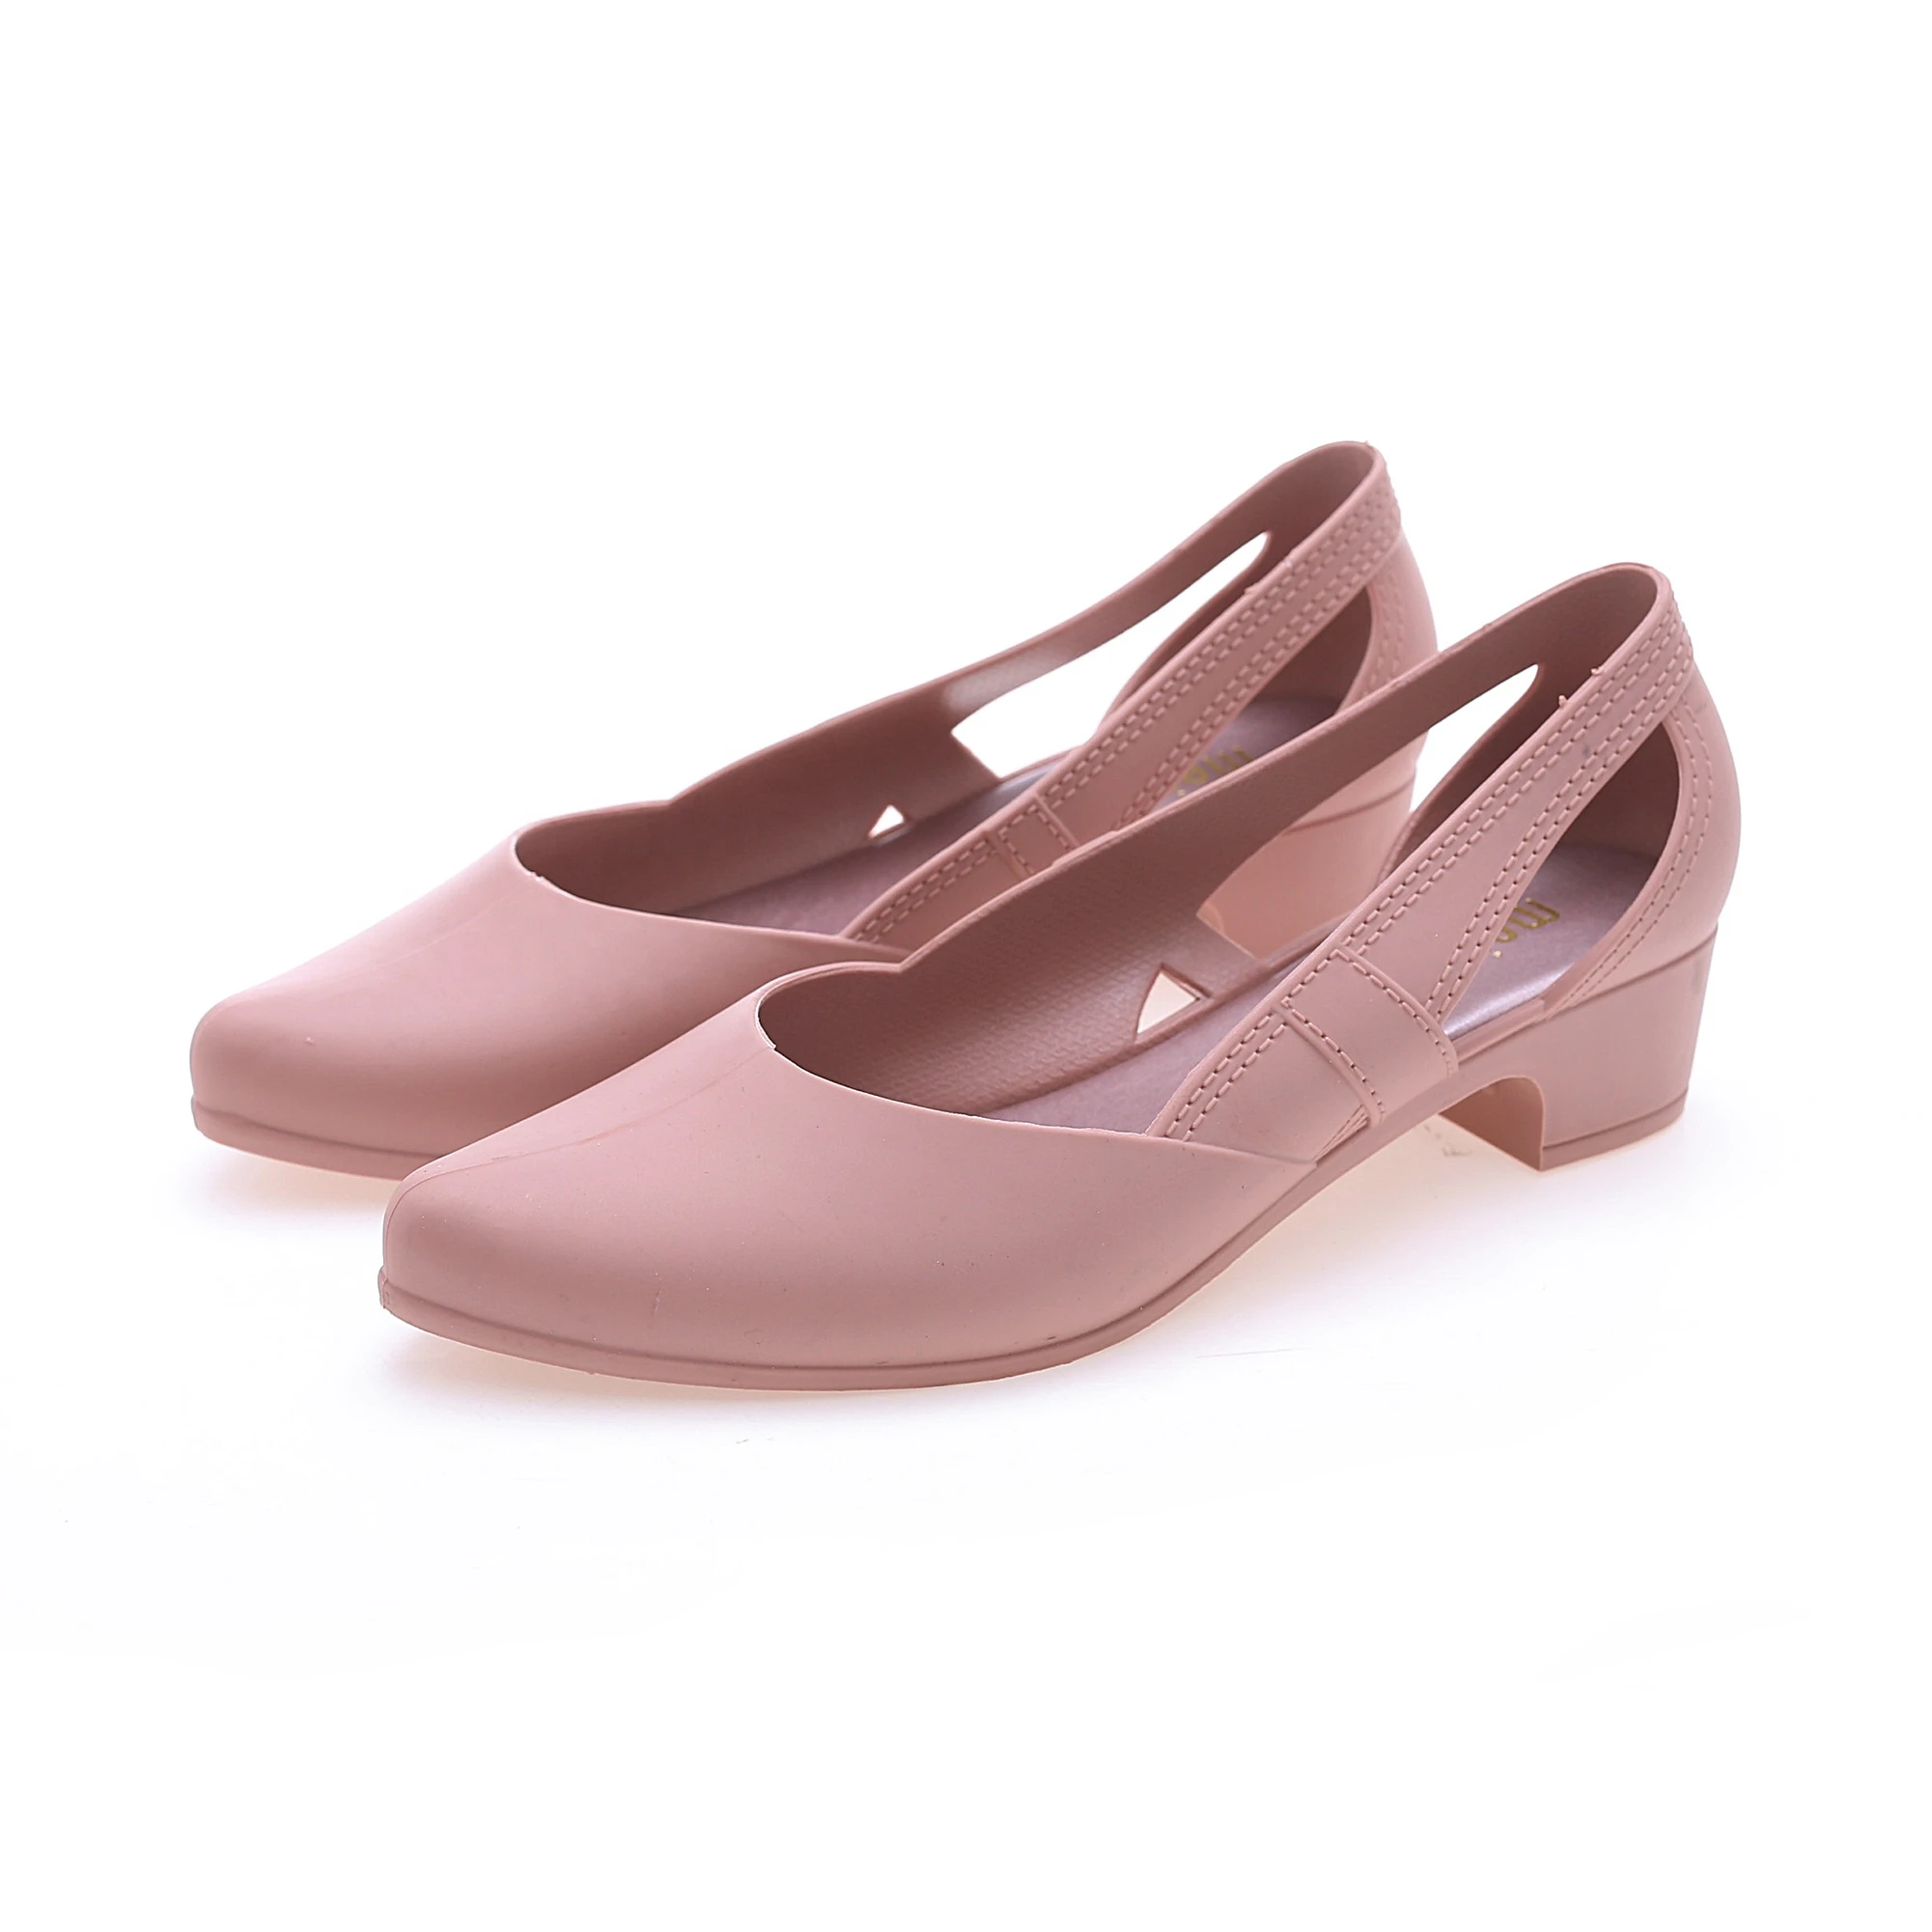 

Sexy Pointed Toe slip on pvc jelly shoes women sandals square heel ladies sandals with platform for wholesale., As pictures or customized color